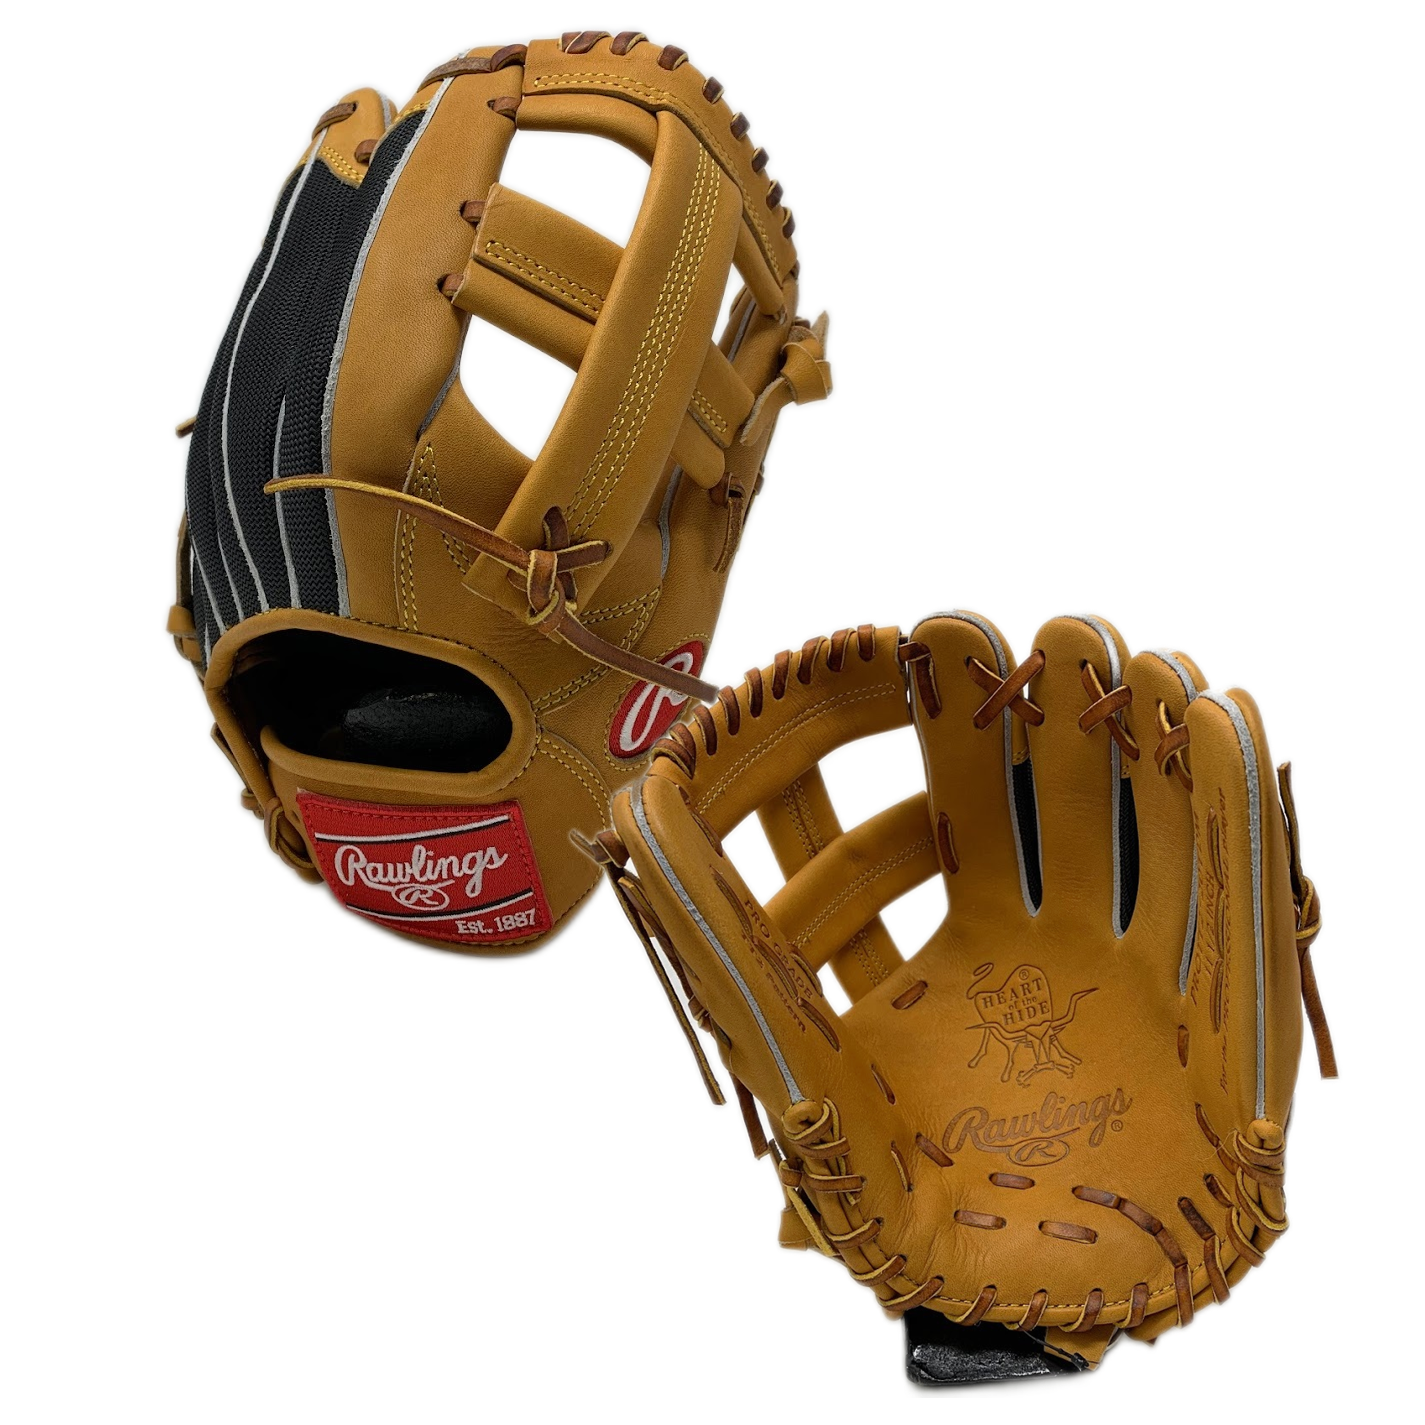 rawlings-heart-of-the-hide-11-5-inch-baseball-glove-tt2-pro-mesh-single-post-x-laced-web-right-hand-throw PROTT2-20TDM-RightHandThrow Rawlings  <p><span style=font-size large;>Max 2 Per Customer</span></p> <p><span style=font-size large;>Constructed from Rawlings